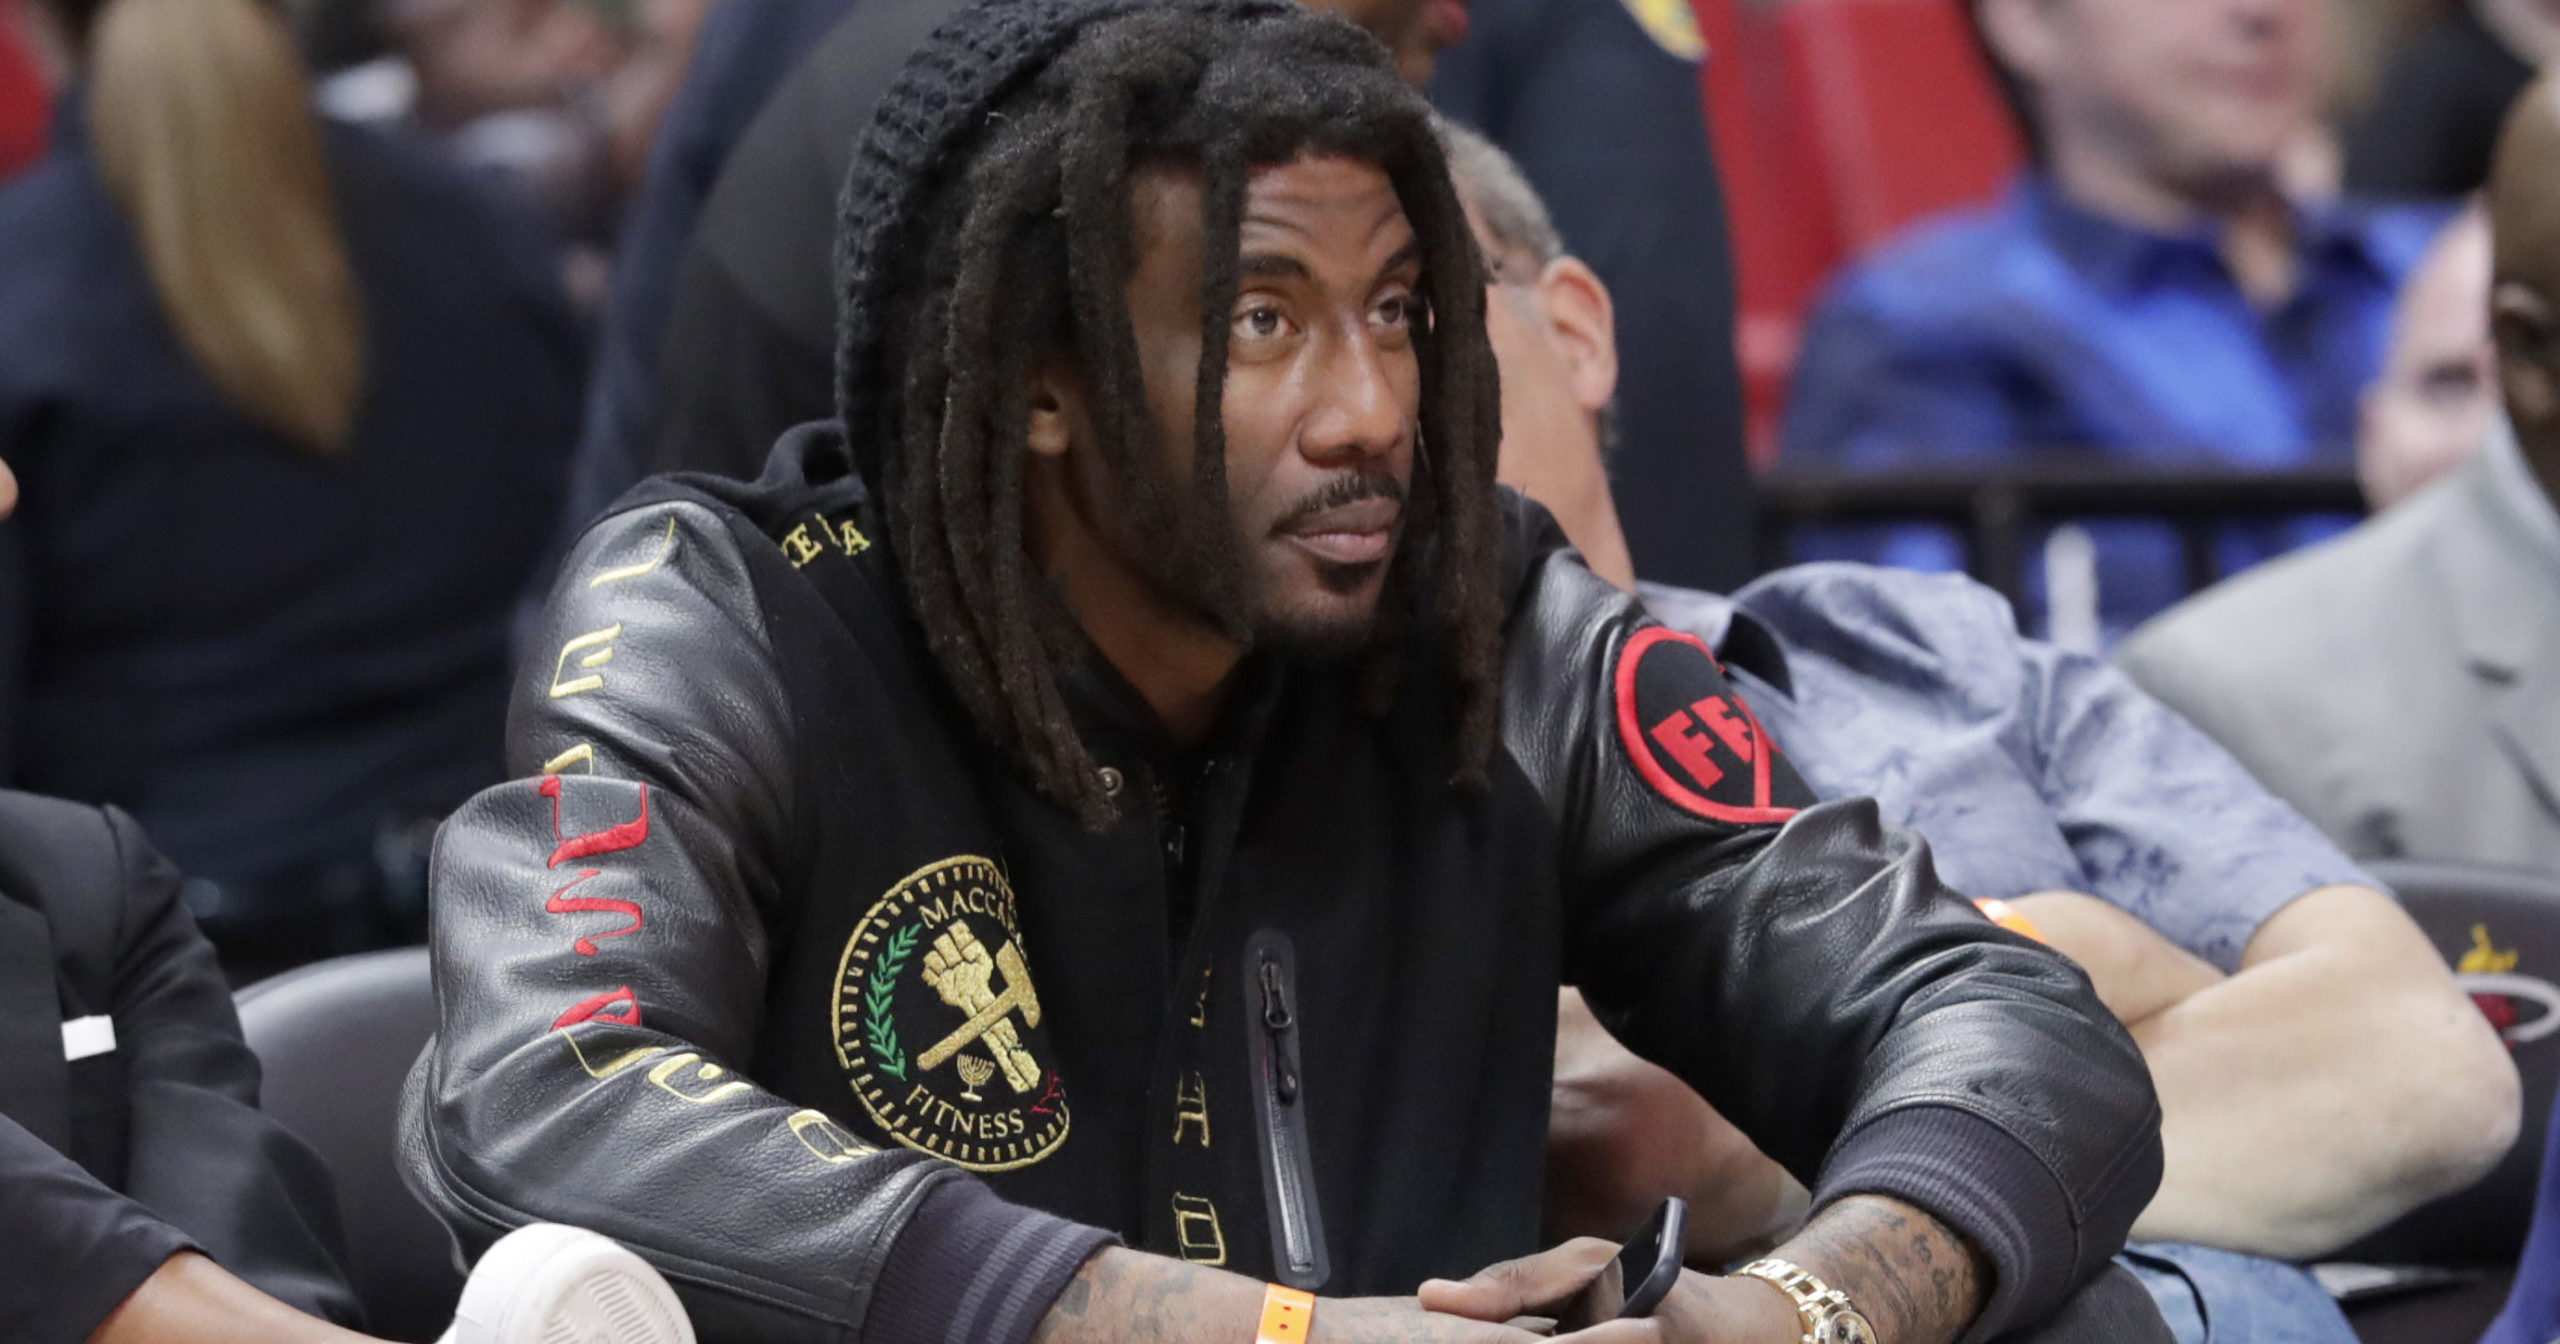 Former NBA star Amar'e Stoudemire watches a game between the Miami Heat and Sacramento Kings on Jan. 20, 2020, in Miami.